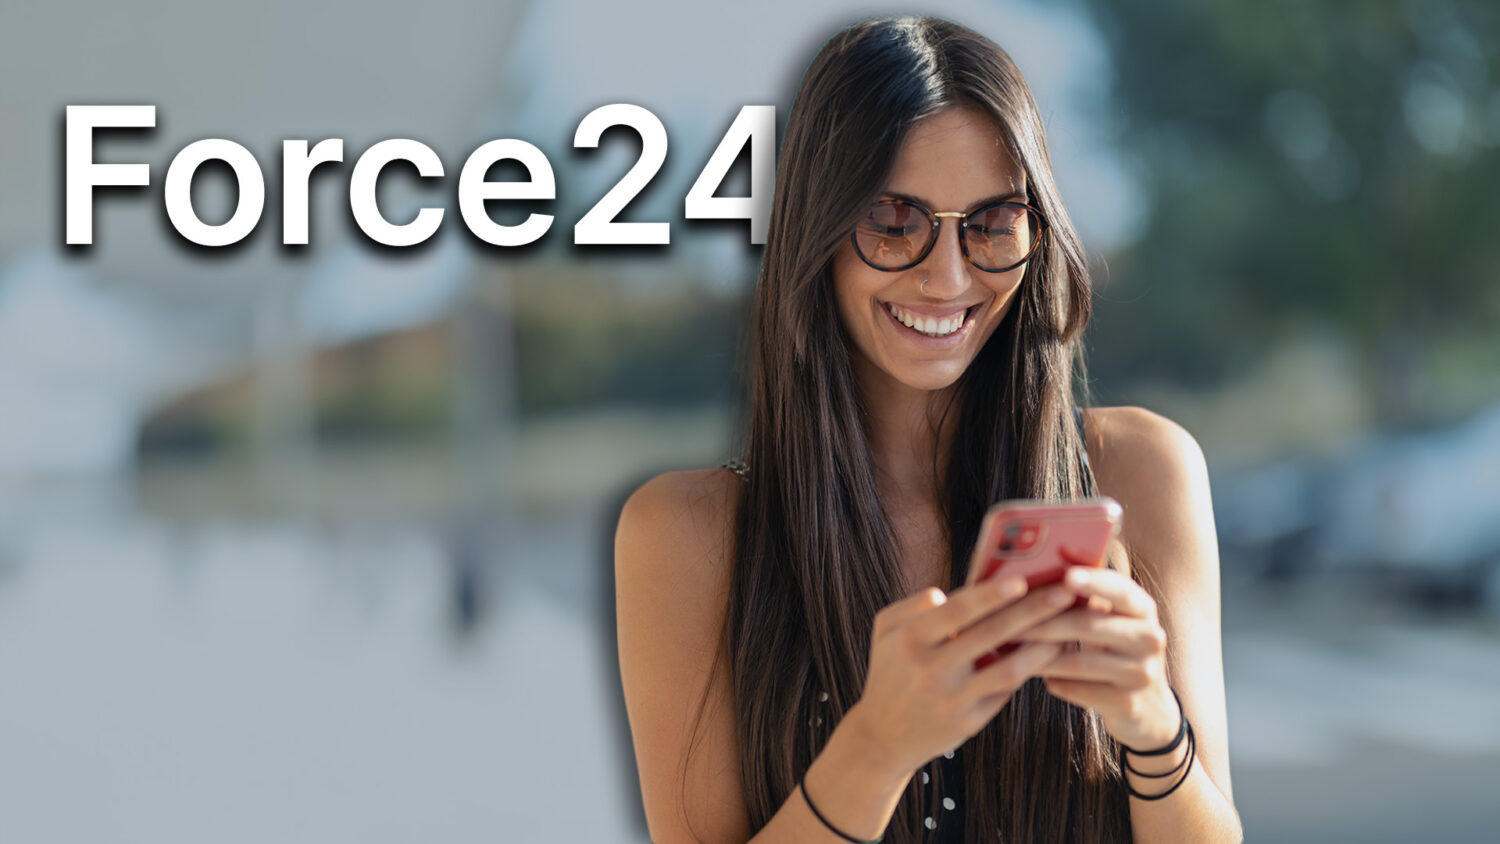 Looking For Marketing AI Automation itris 9 Recruitment CRM X Force24 Showcase